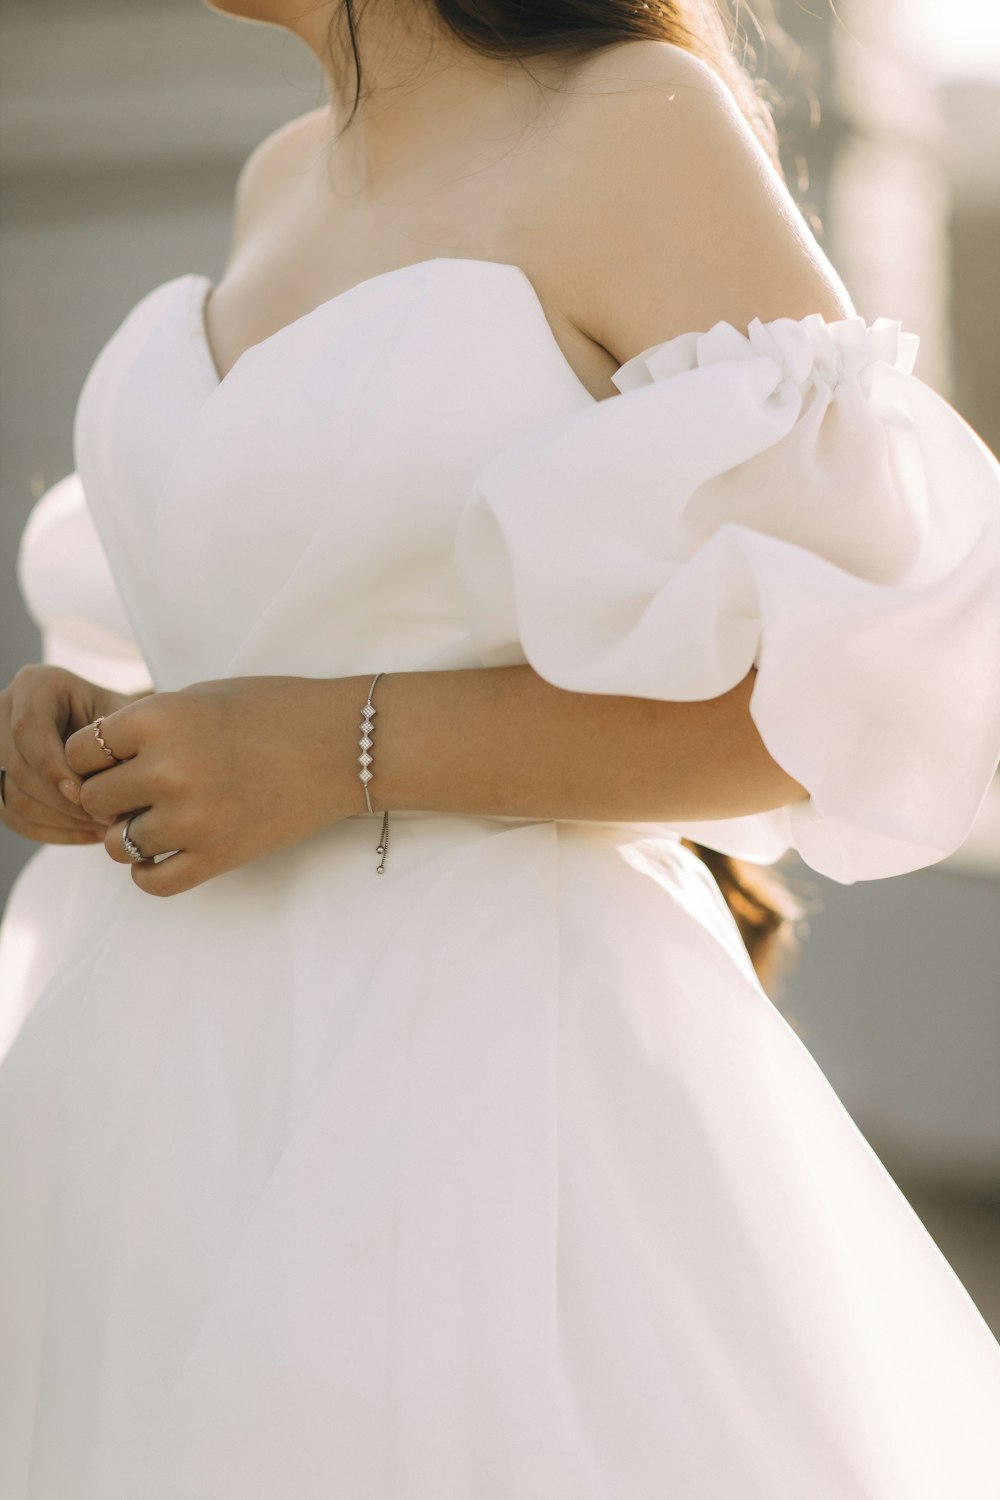 a woman in a white dress with a ring on her finger